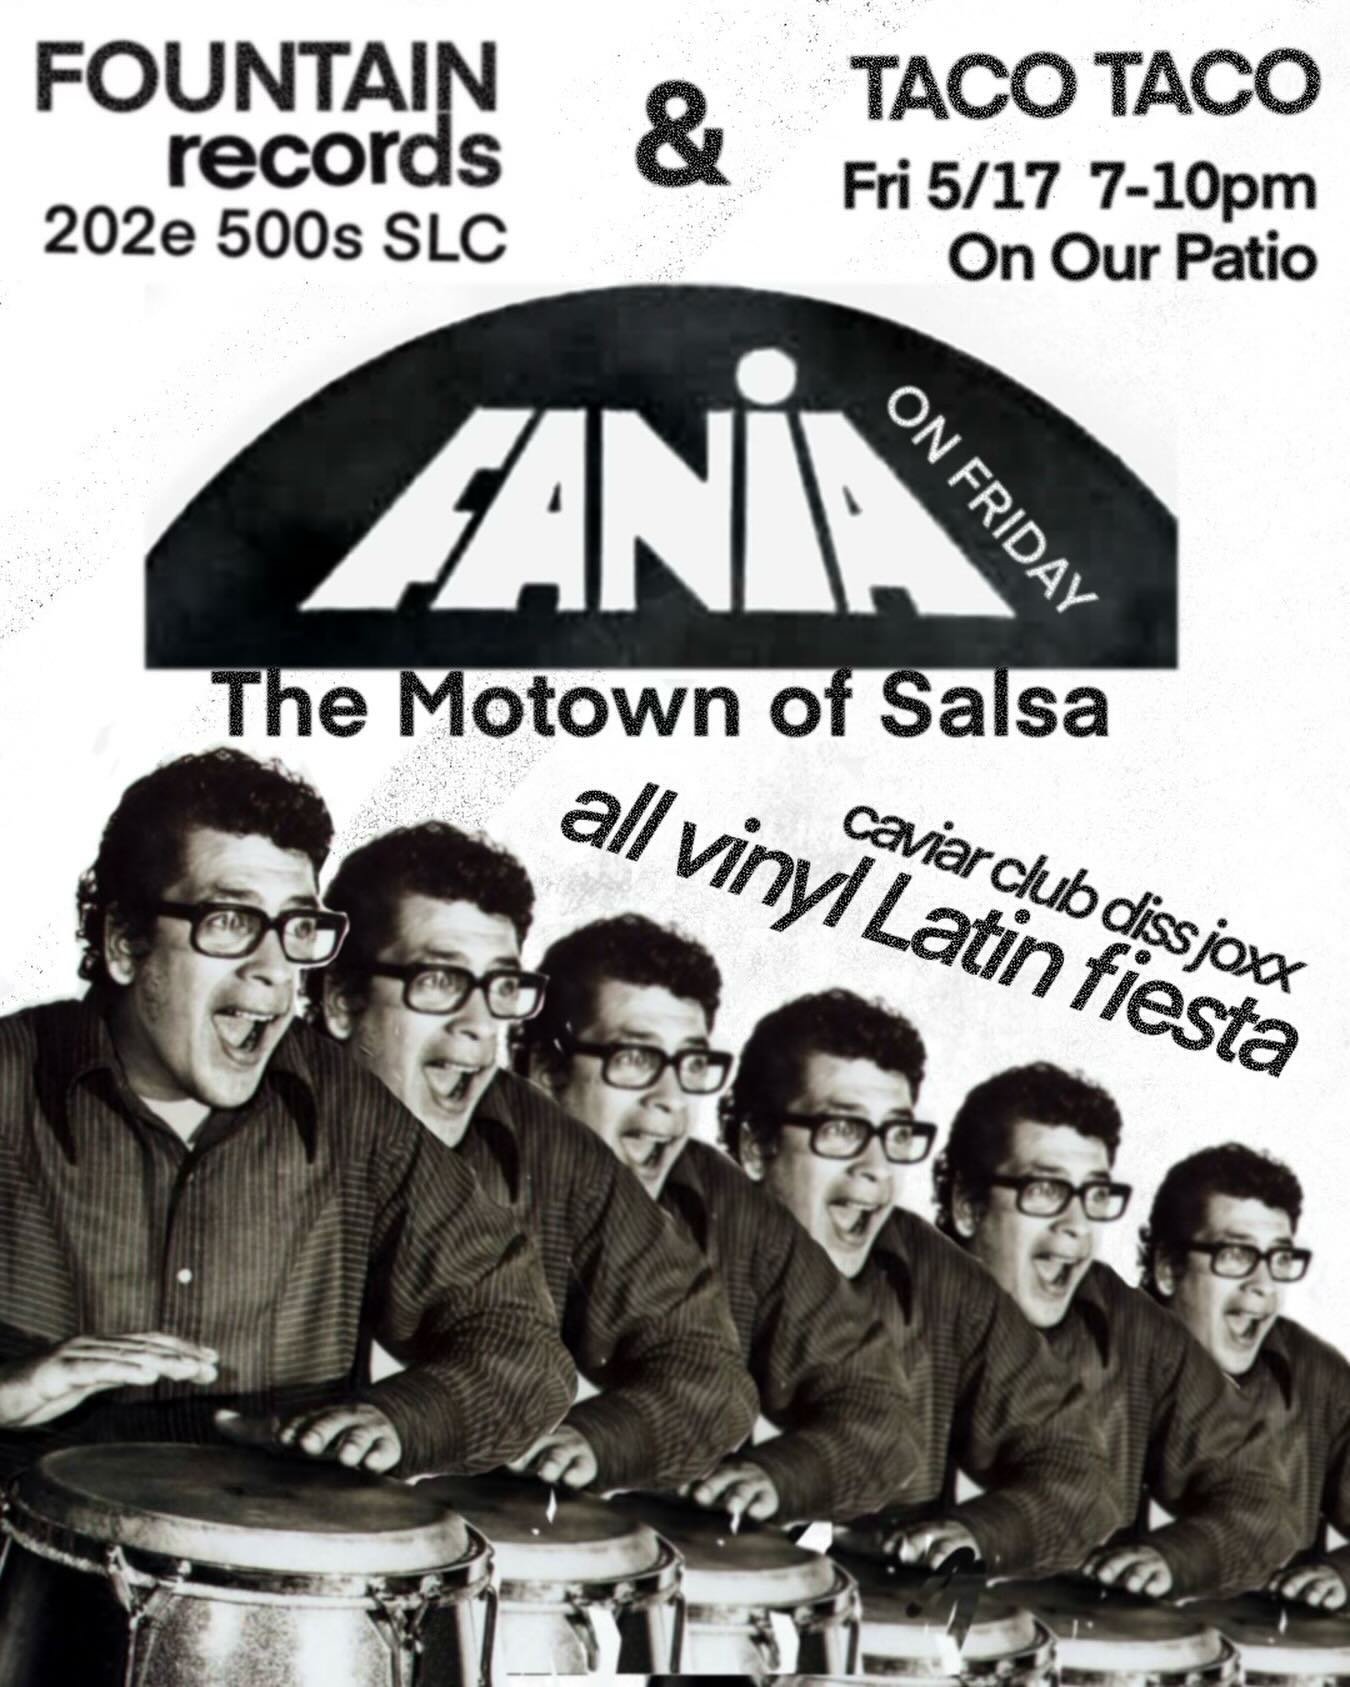 Join us for a patio jam Friday 5/17 7-10pm with @tacotacoslc and @cvrclb for a Motown of Salsa all-vinyl Latin fiesta!! 💃🪅🎉🌮